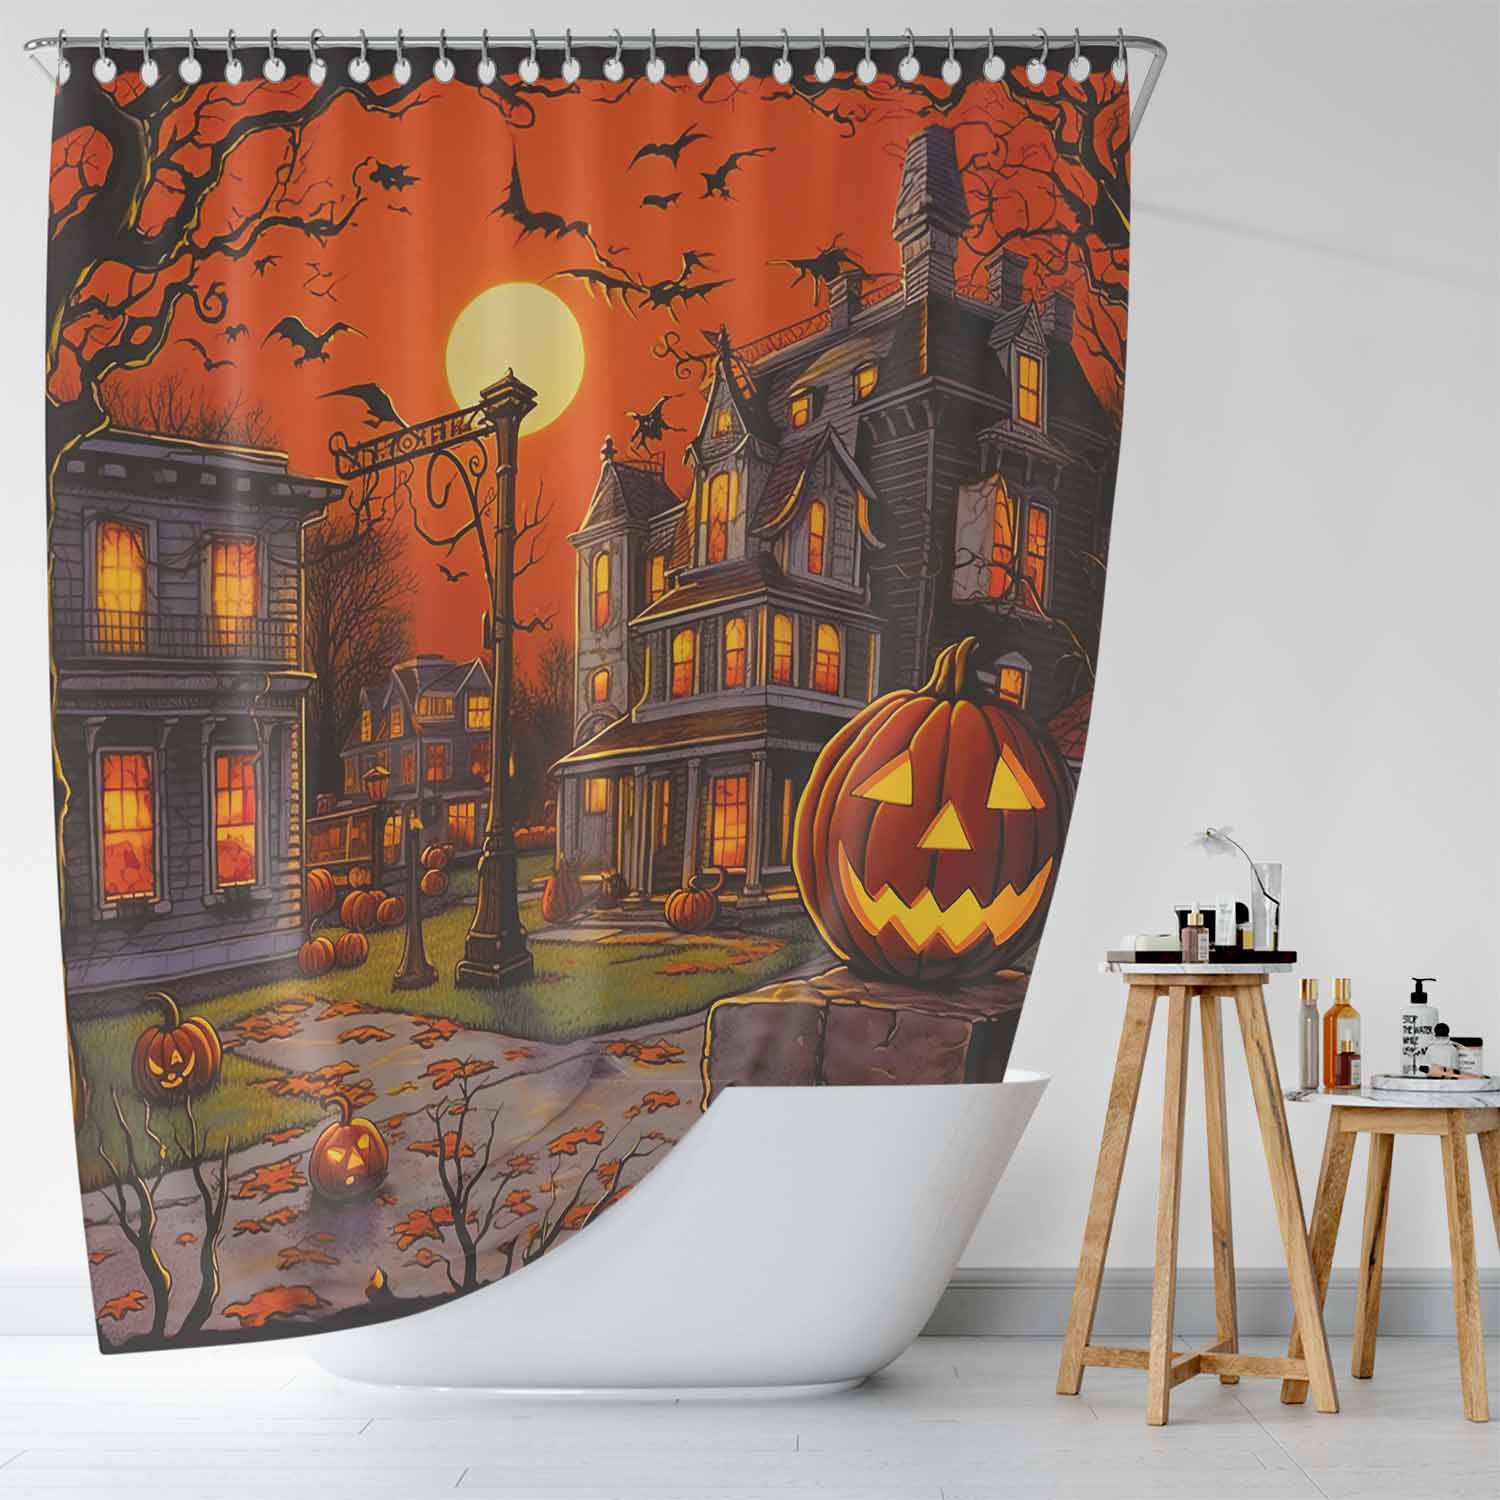 Transform your bathroom into a spooky oasis with the Pumpkin Halloween Shower Curtain from Cotton Cat featuring a pumpkin design. This 90s-style curtain not only adds a touch of nostalgic charm, but it is also waterproof.